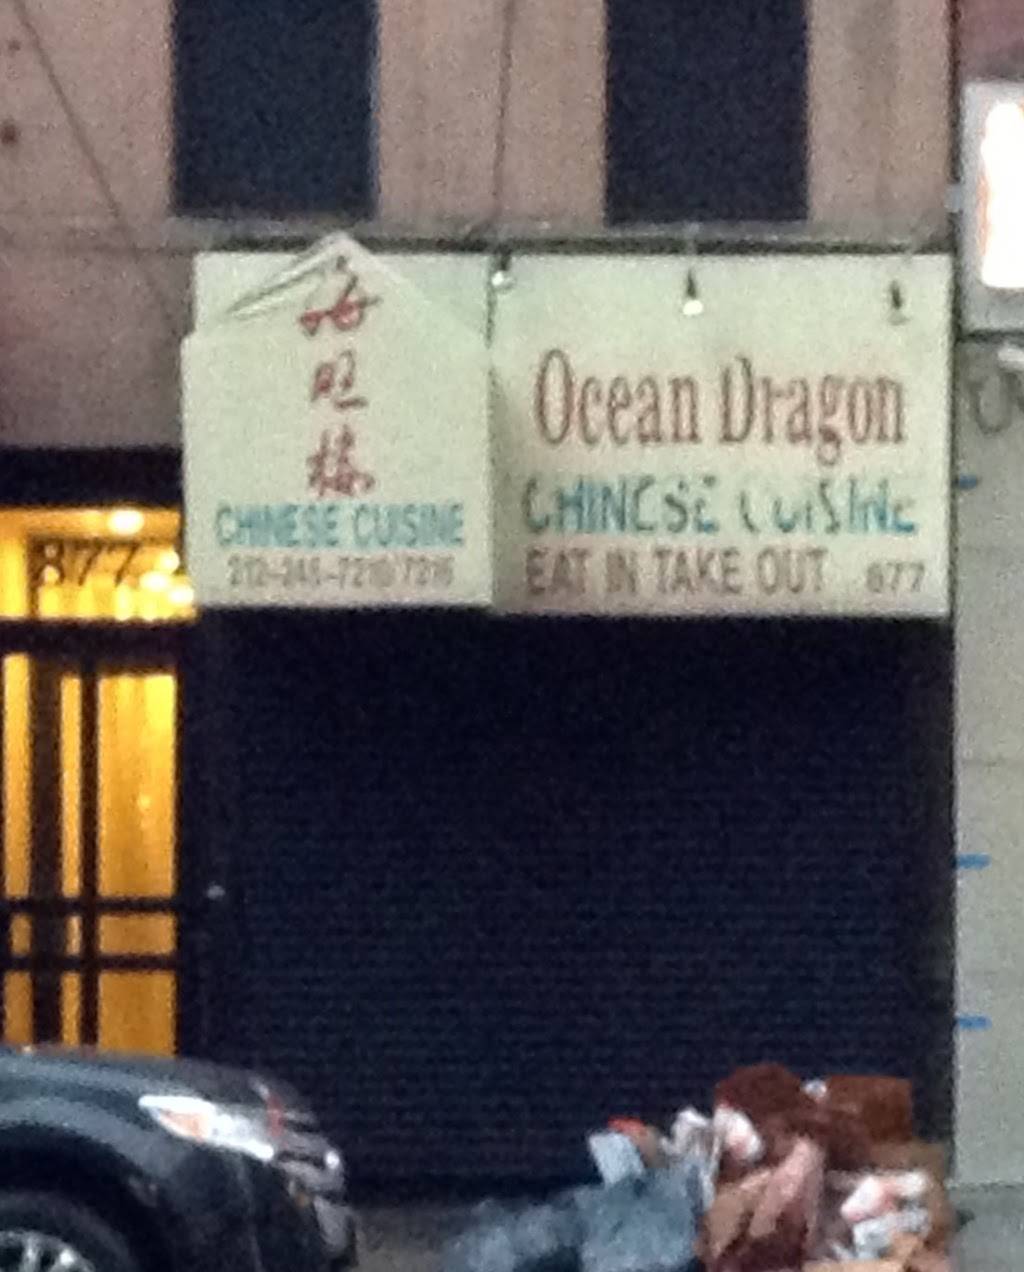 Ocean Dragon | meal delivery | 877 10th Ave #2, New York, NY 10019, USA | 2122457210 OR +1 212-245-7210